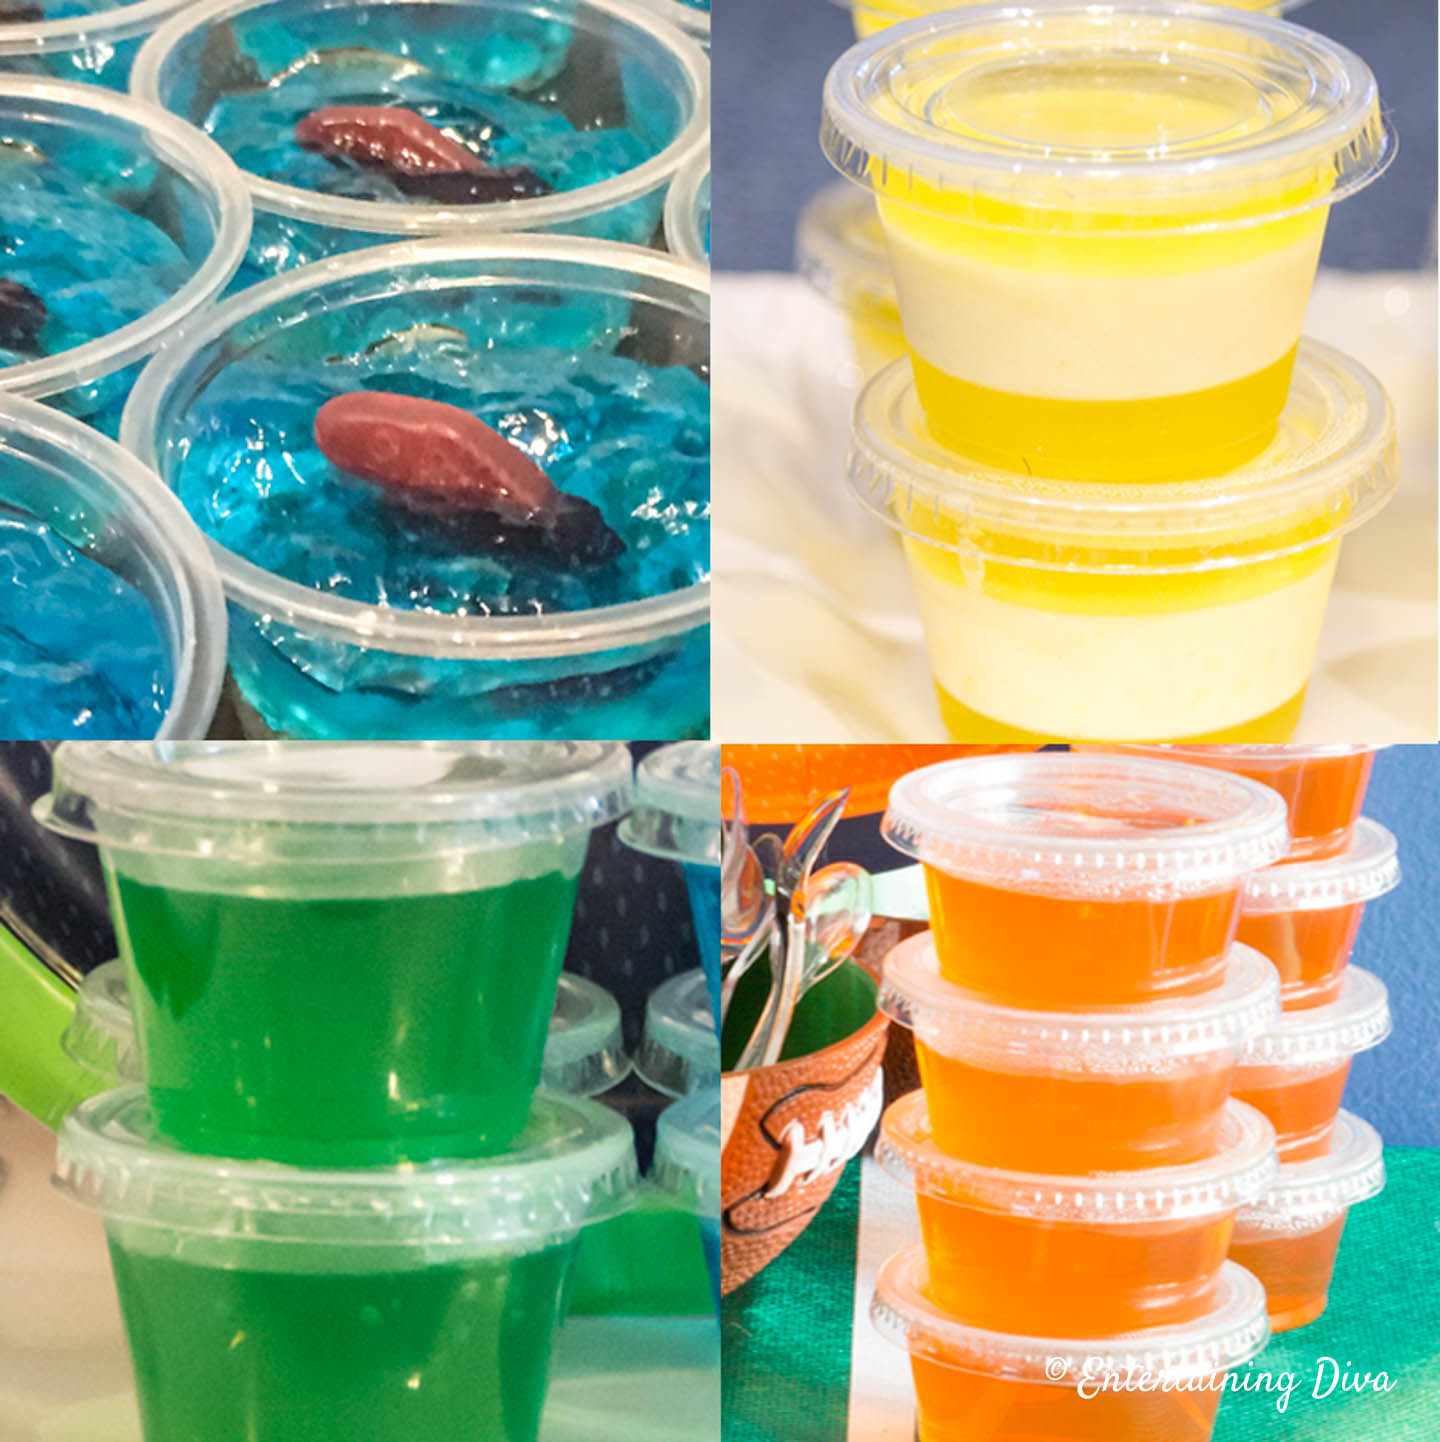 17 Of The Best Jello Shots (By Color) - Entertaining Diva